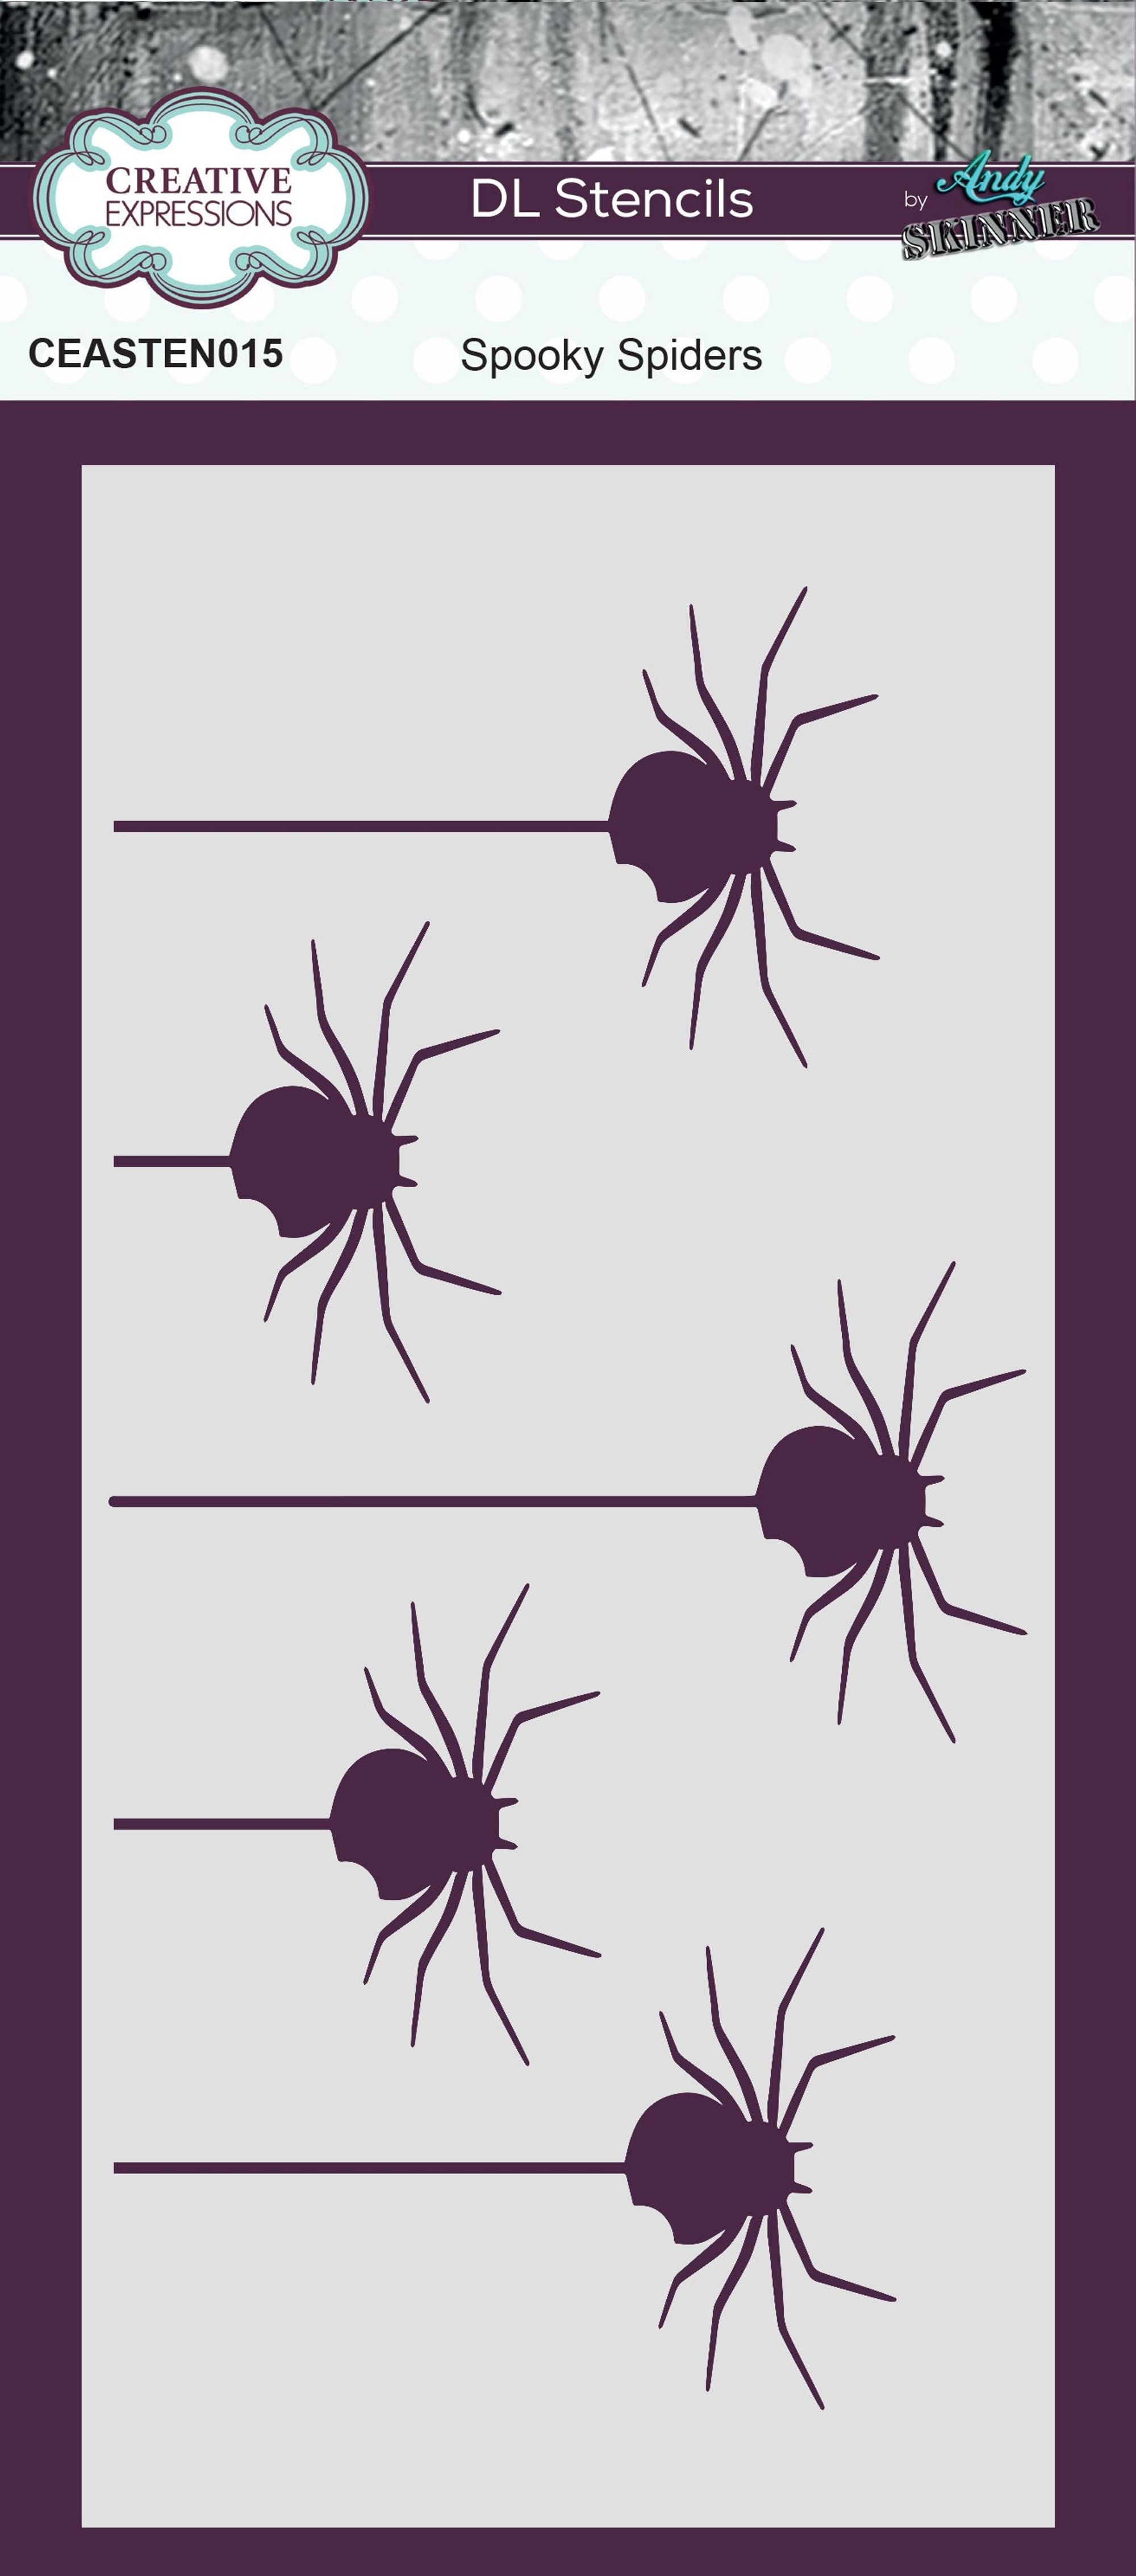 Creative Expressions Andy Skinner Spooky Spiders DL Stencil